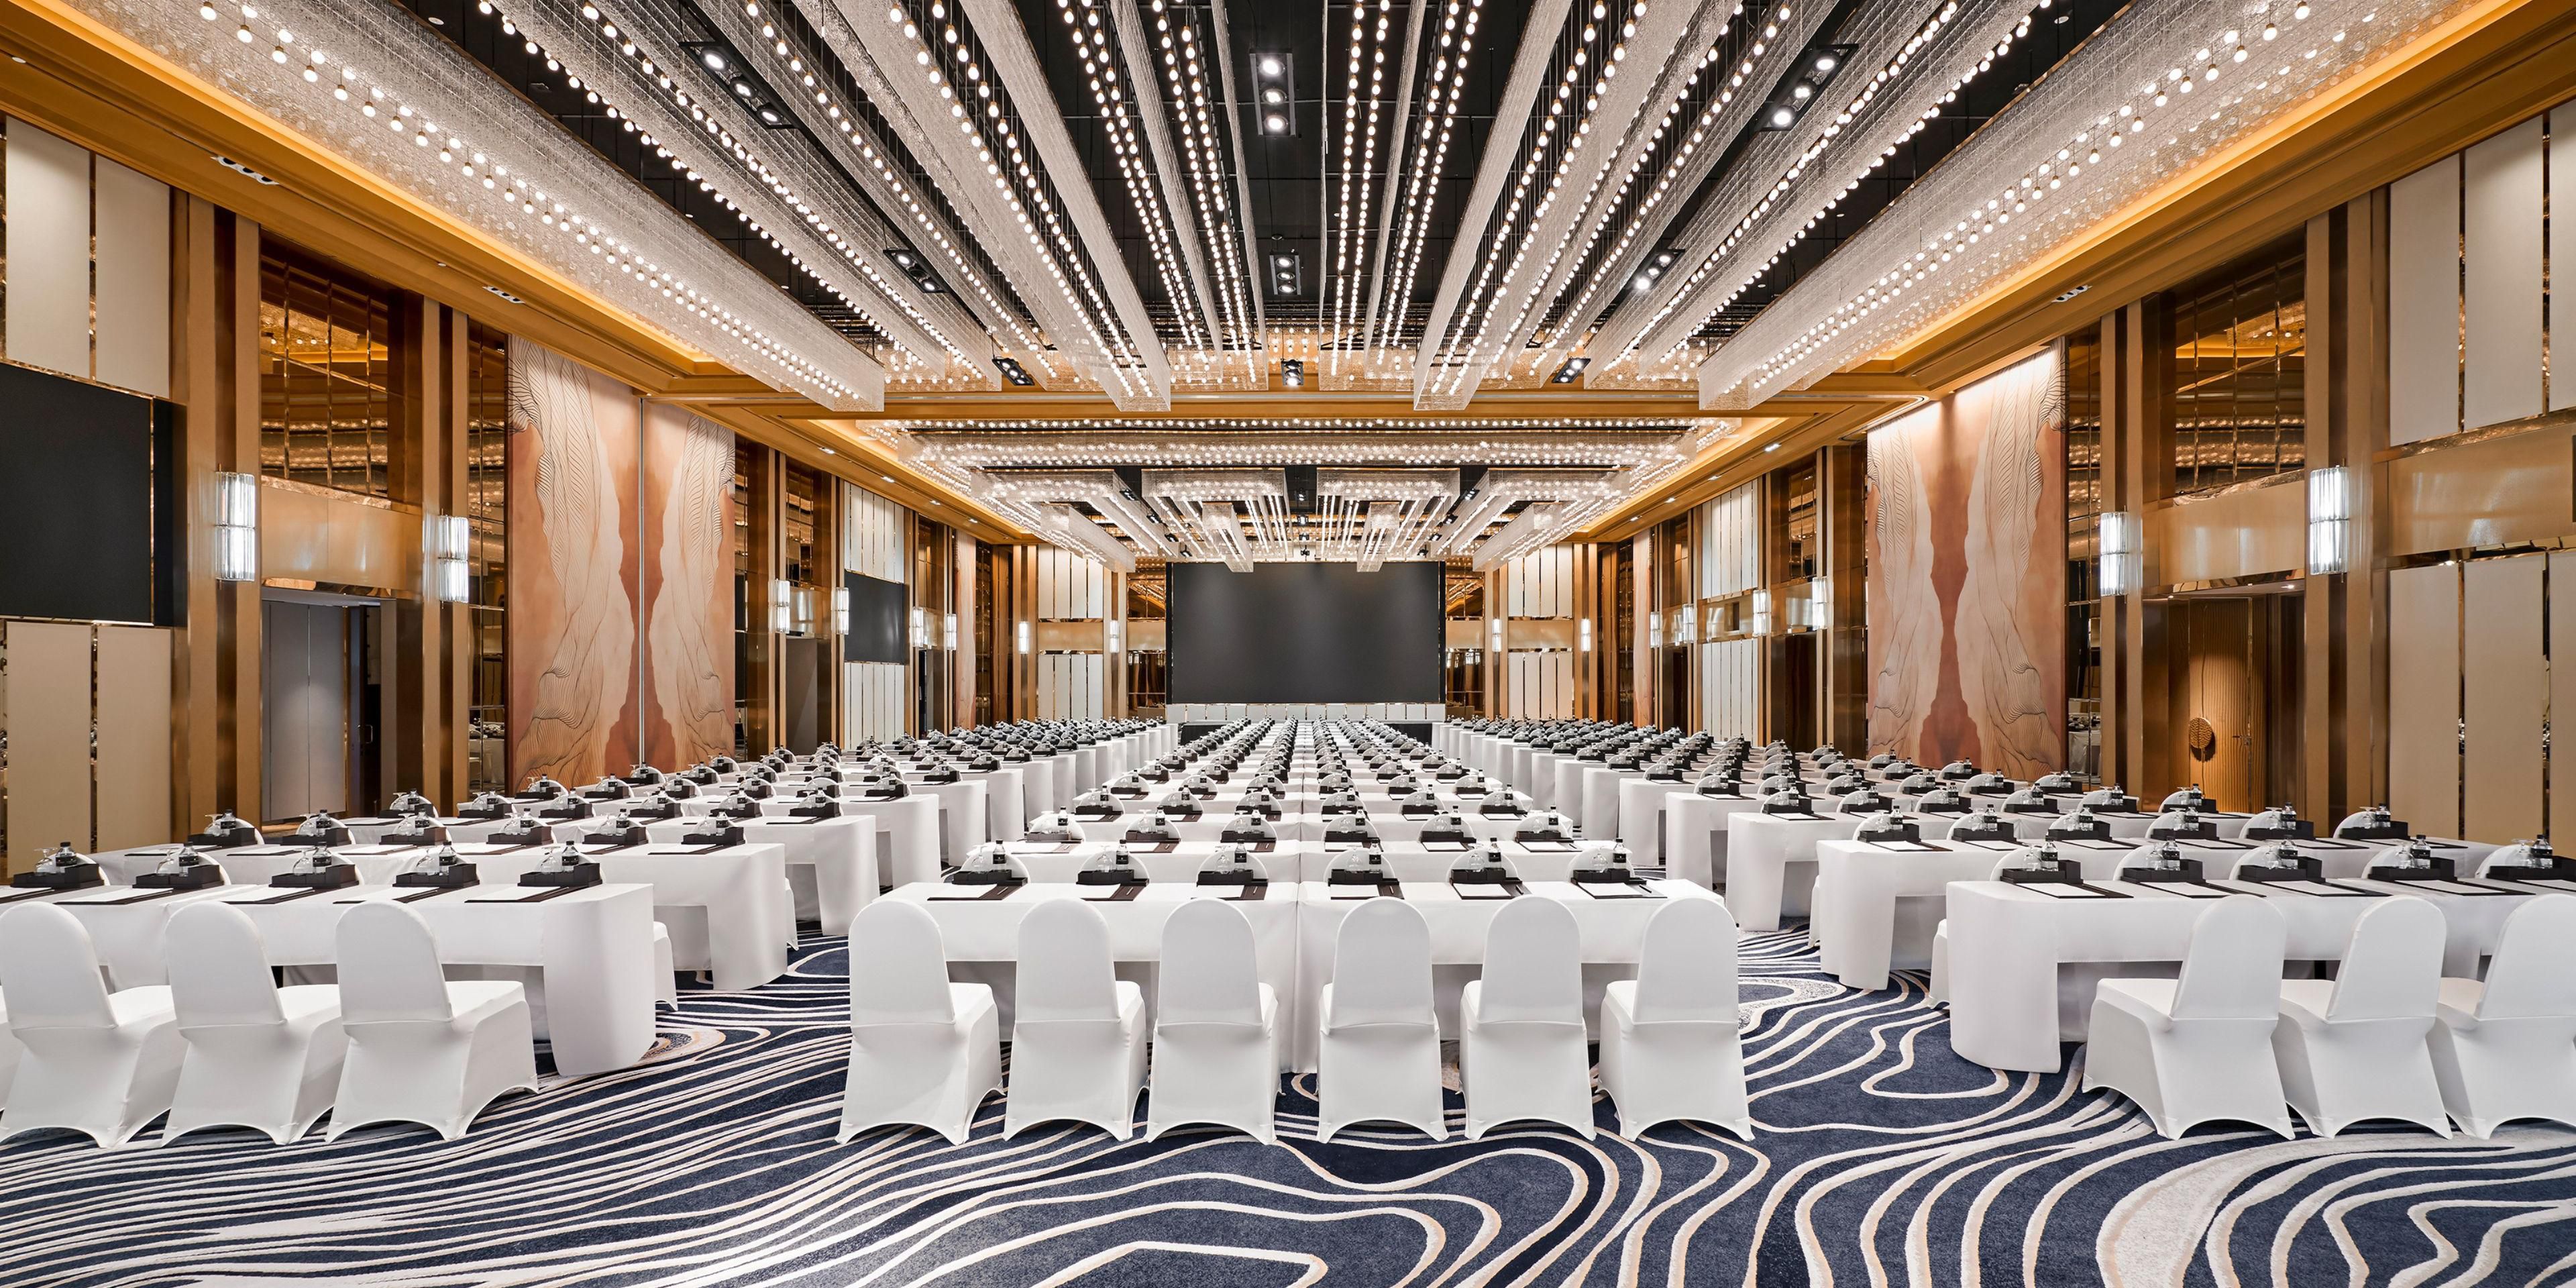 Experience seamless meetings and conferences at InterContinental Saigon. The hotel features over 1,800 sqm of elegant meeting space with natural lighting, state-of-the-art facilities and one of the largest pillar-less grand ballrooms in town.